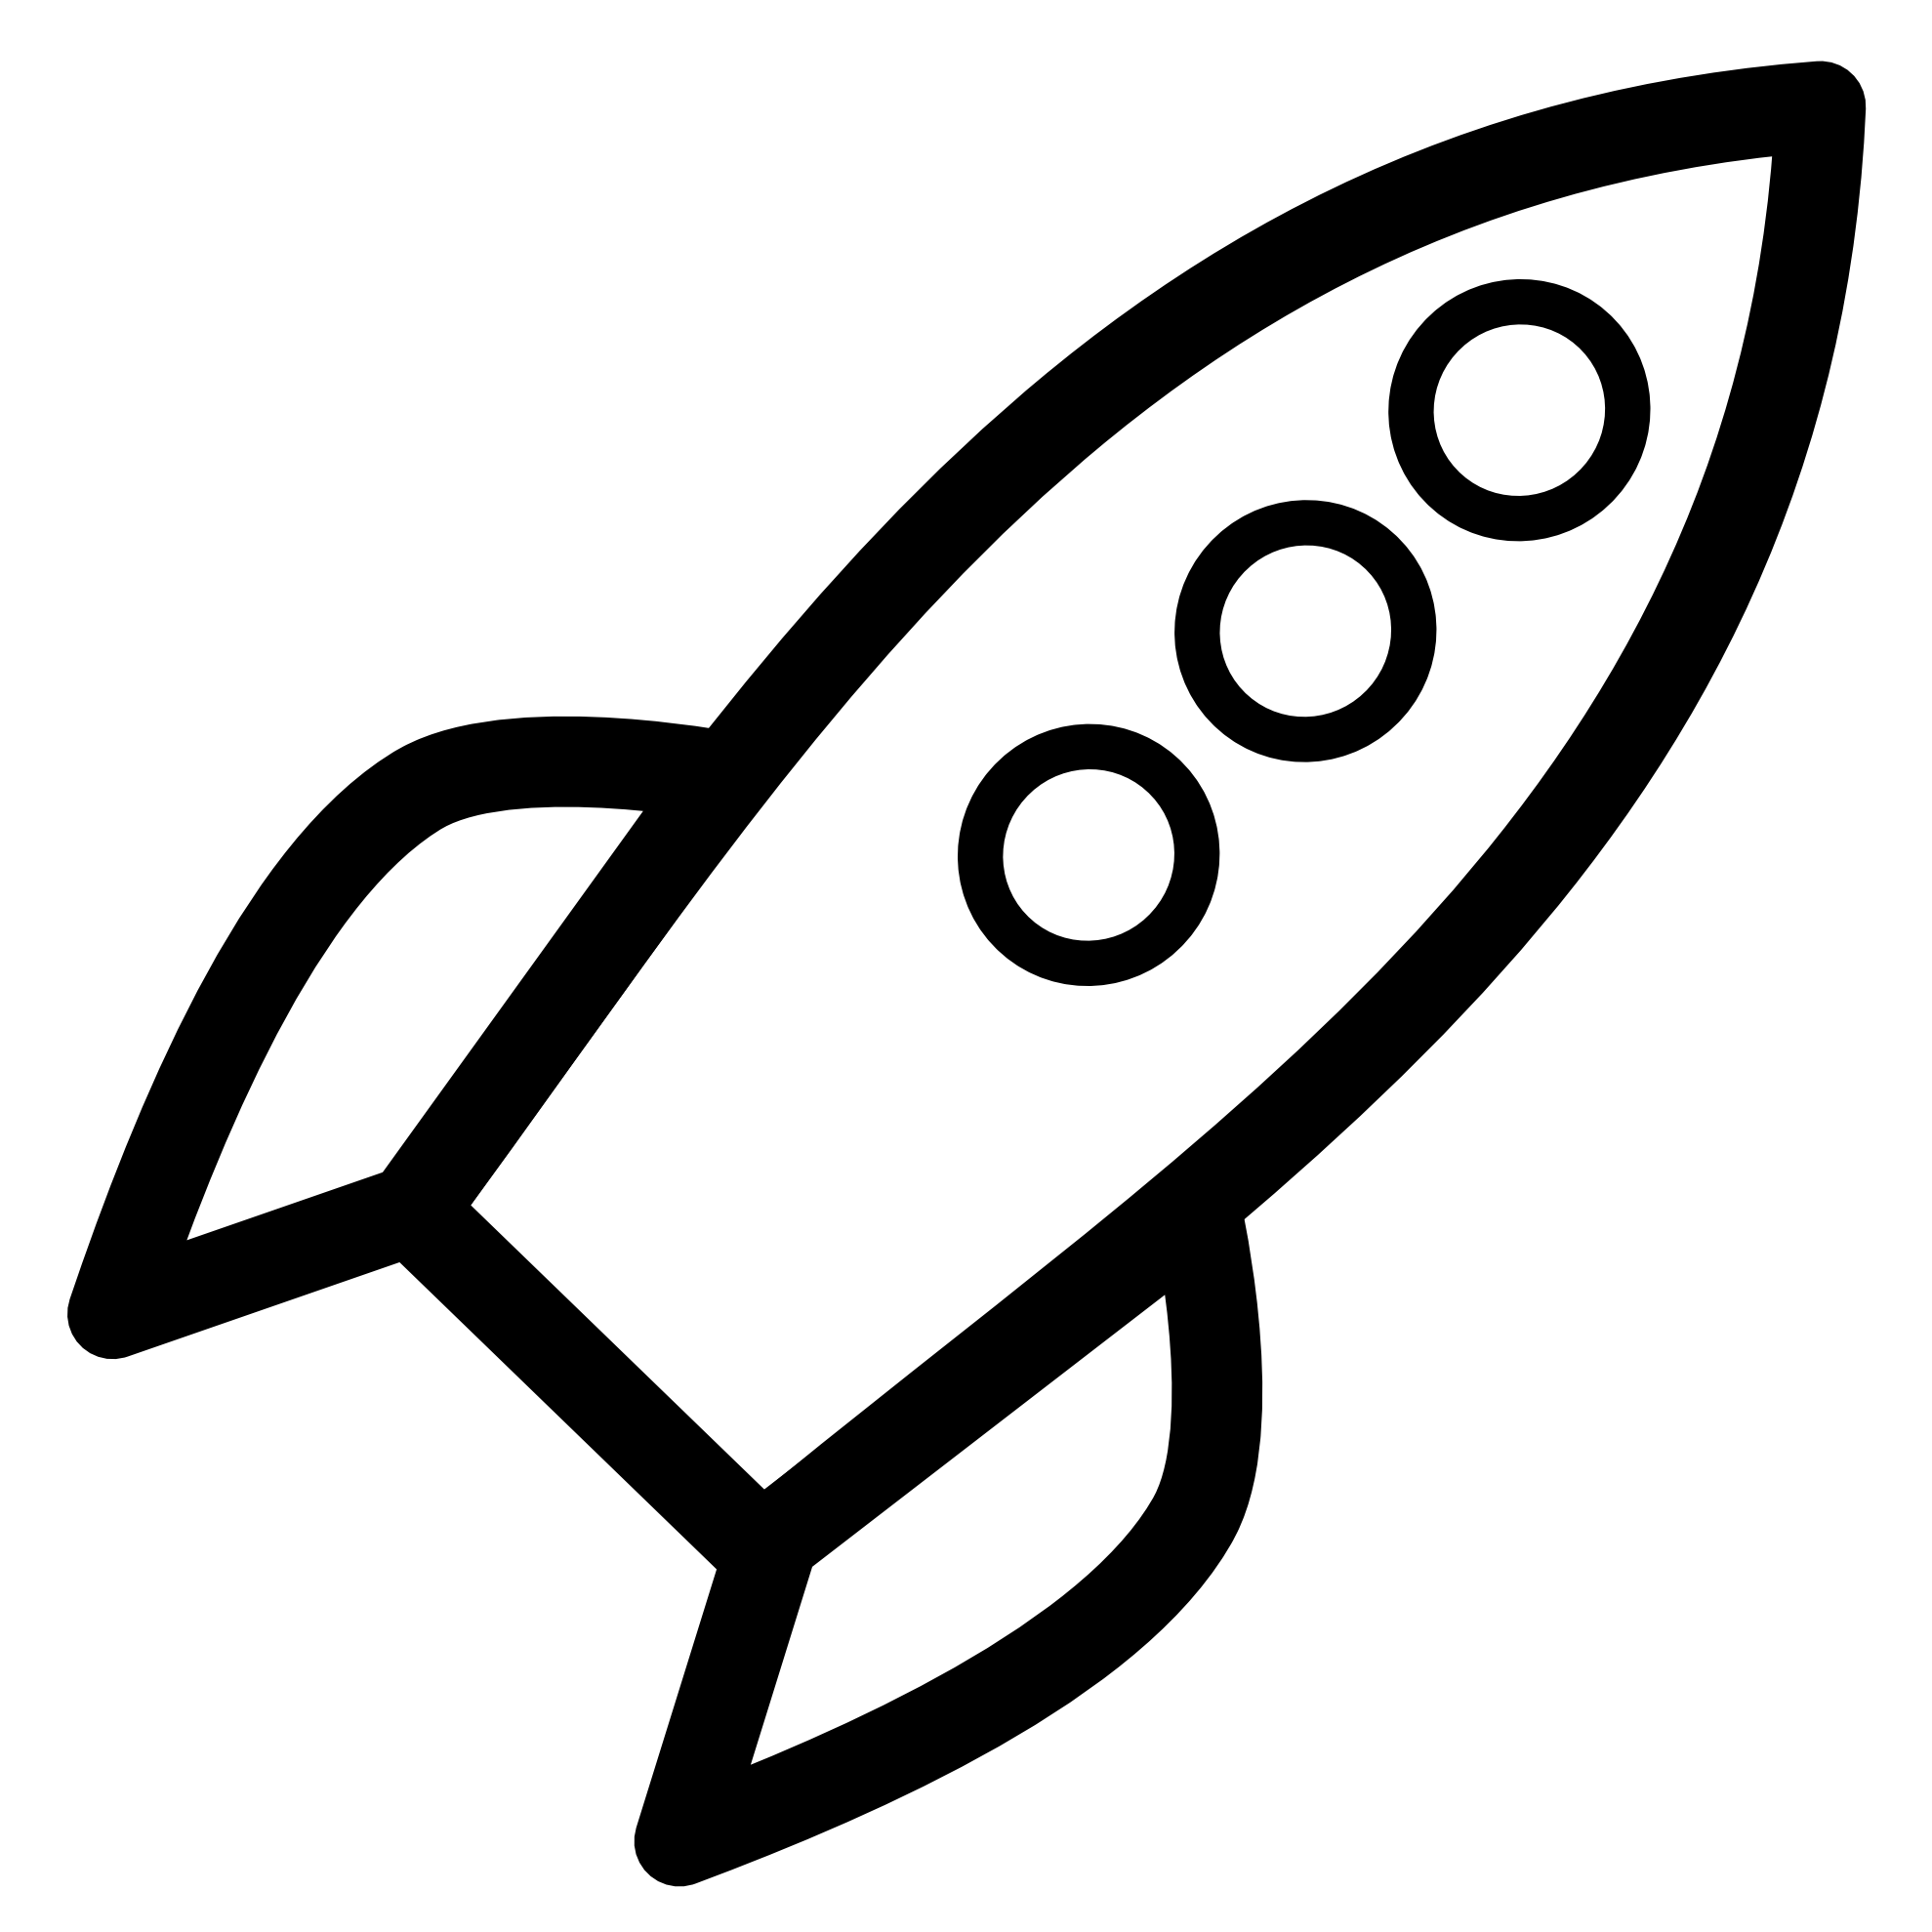 Rocket Cartoon Black And White - ClipArt Best